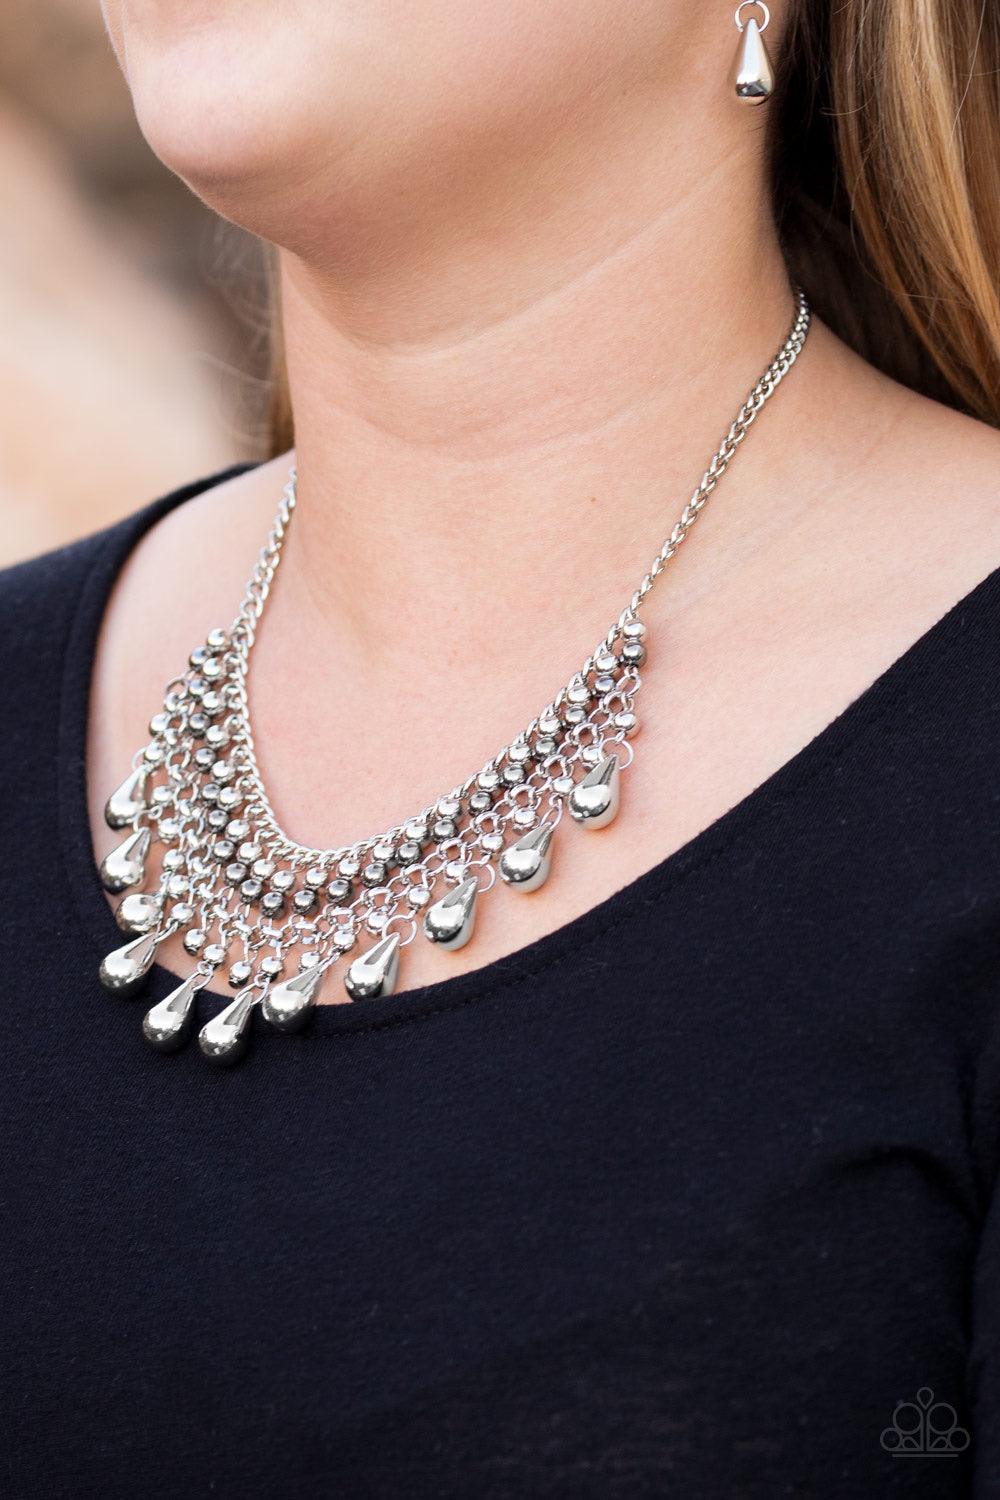 Paparazzi Accessories Don’t Forget To BOSS! - Silver Threaded along metallic rods, stacked silver and gunmetal beads give way to shimmery silver teardrops. The edgy fringe flawlessly drapes beneath the collar, creating a sassy tapered fringe. Features an